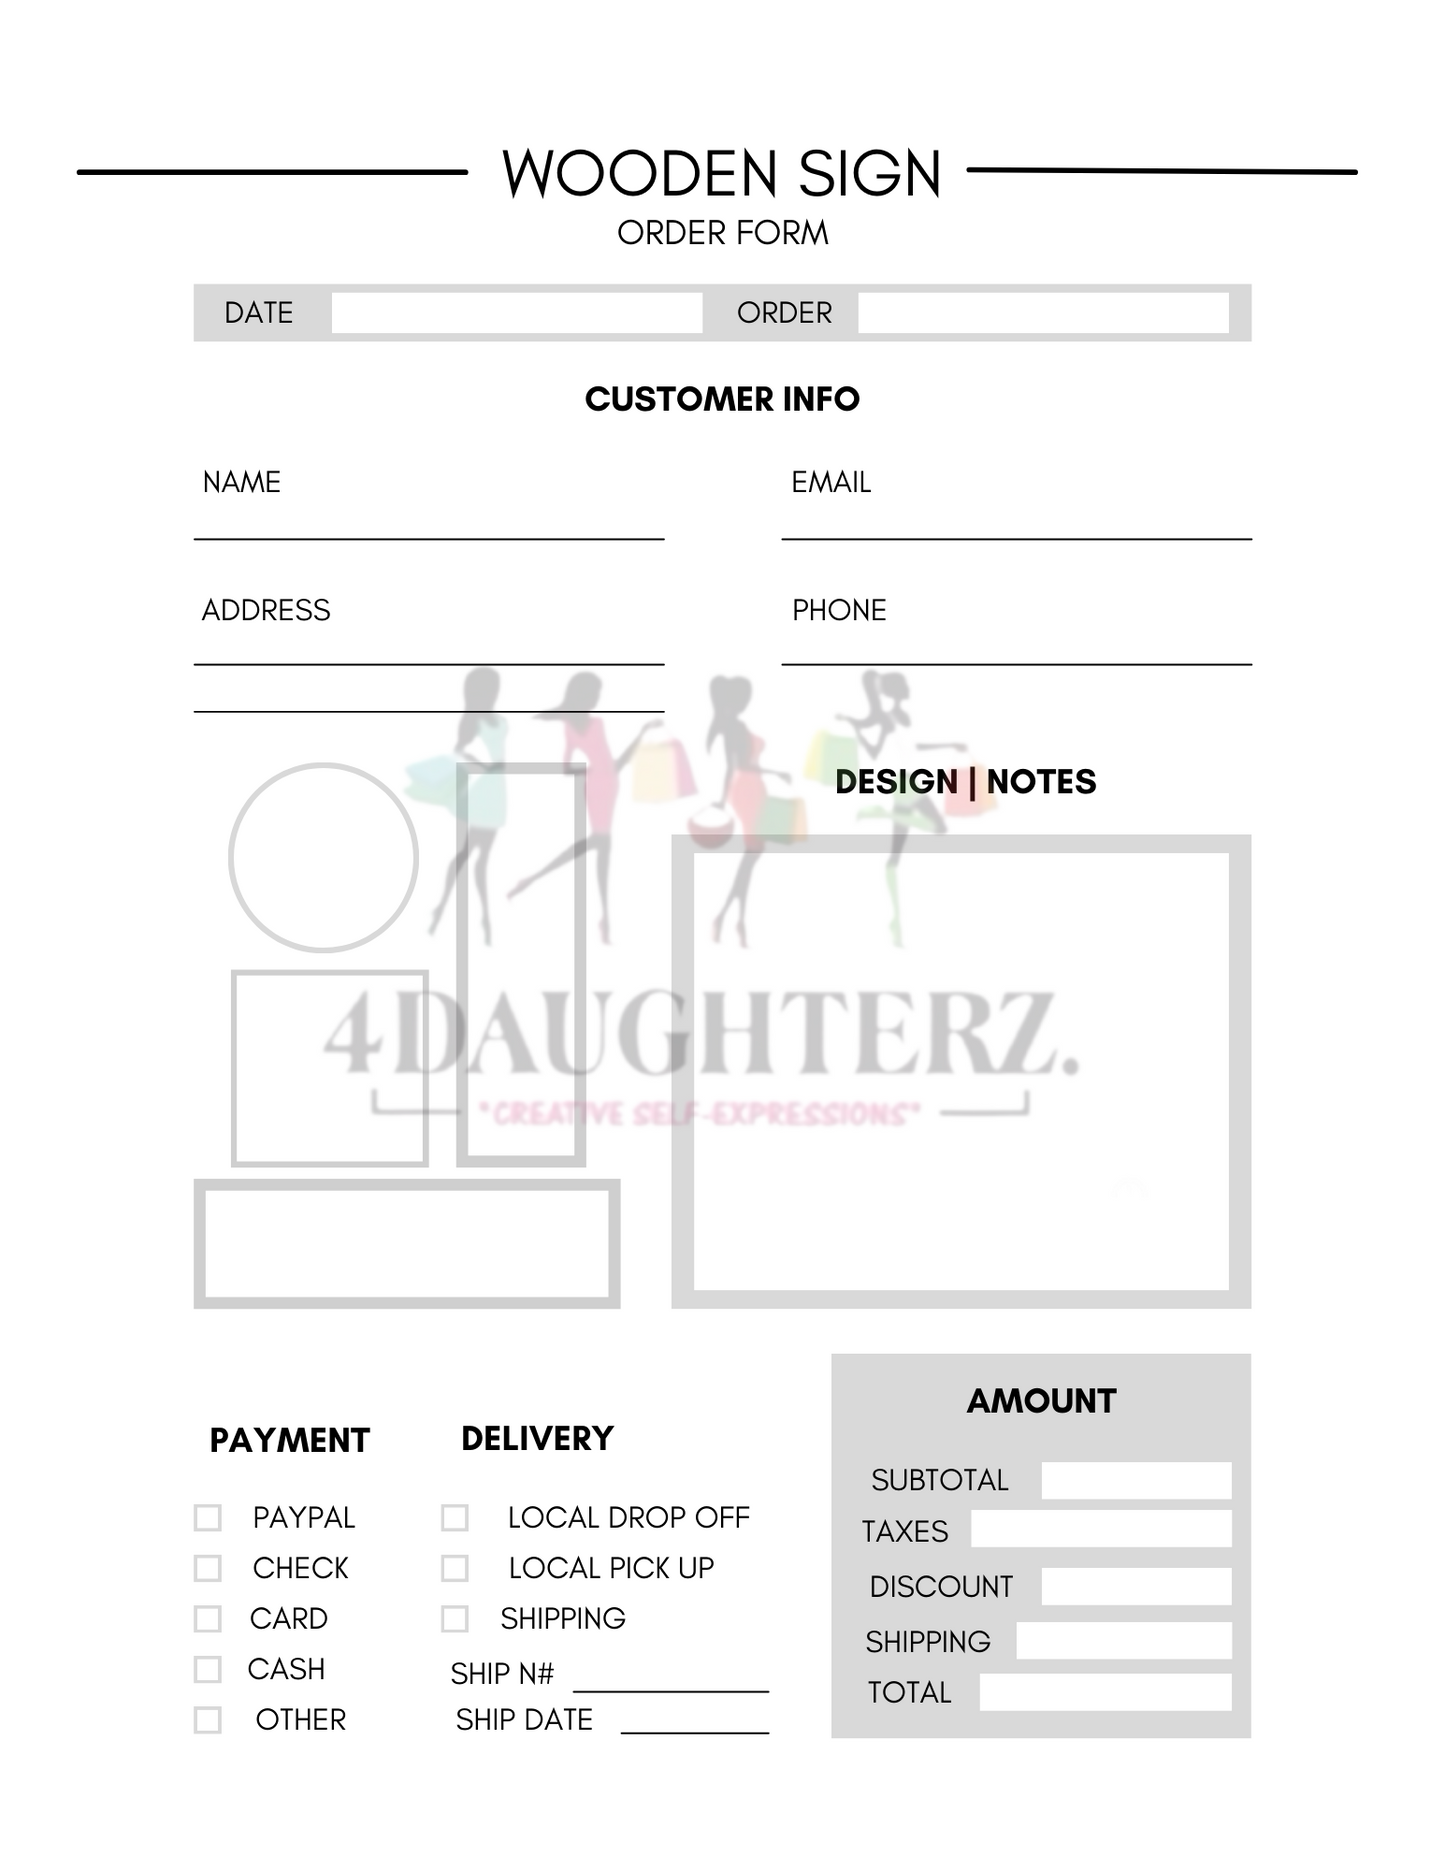 Order Forms & Inventory Tracker Book *Made for You-Printable Download*15 pages*